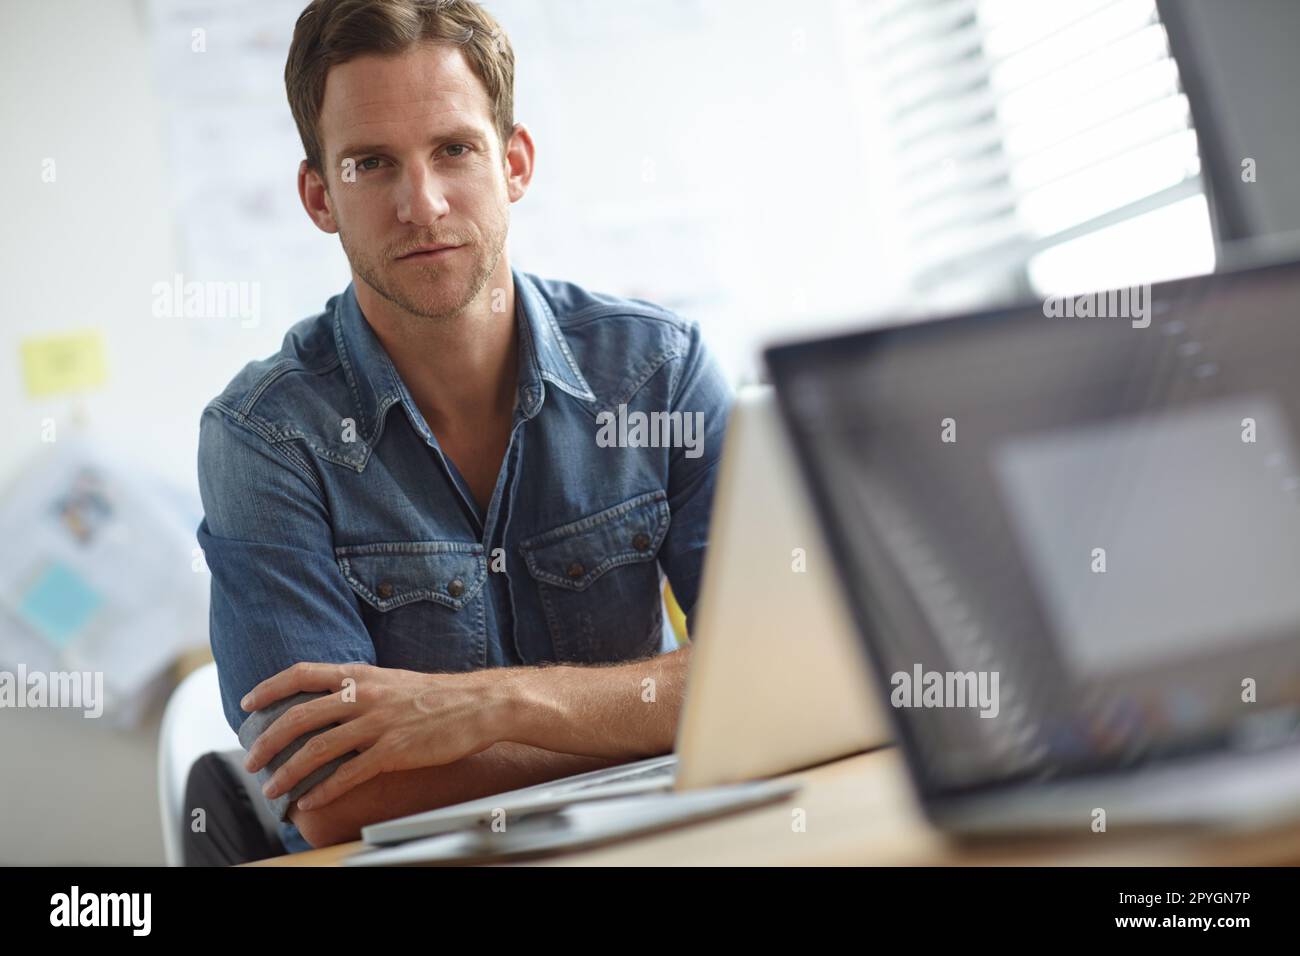 Serious about work. A young man sitting at his desk while looking at the camera. Stock Photo